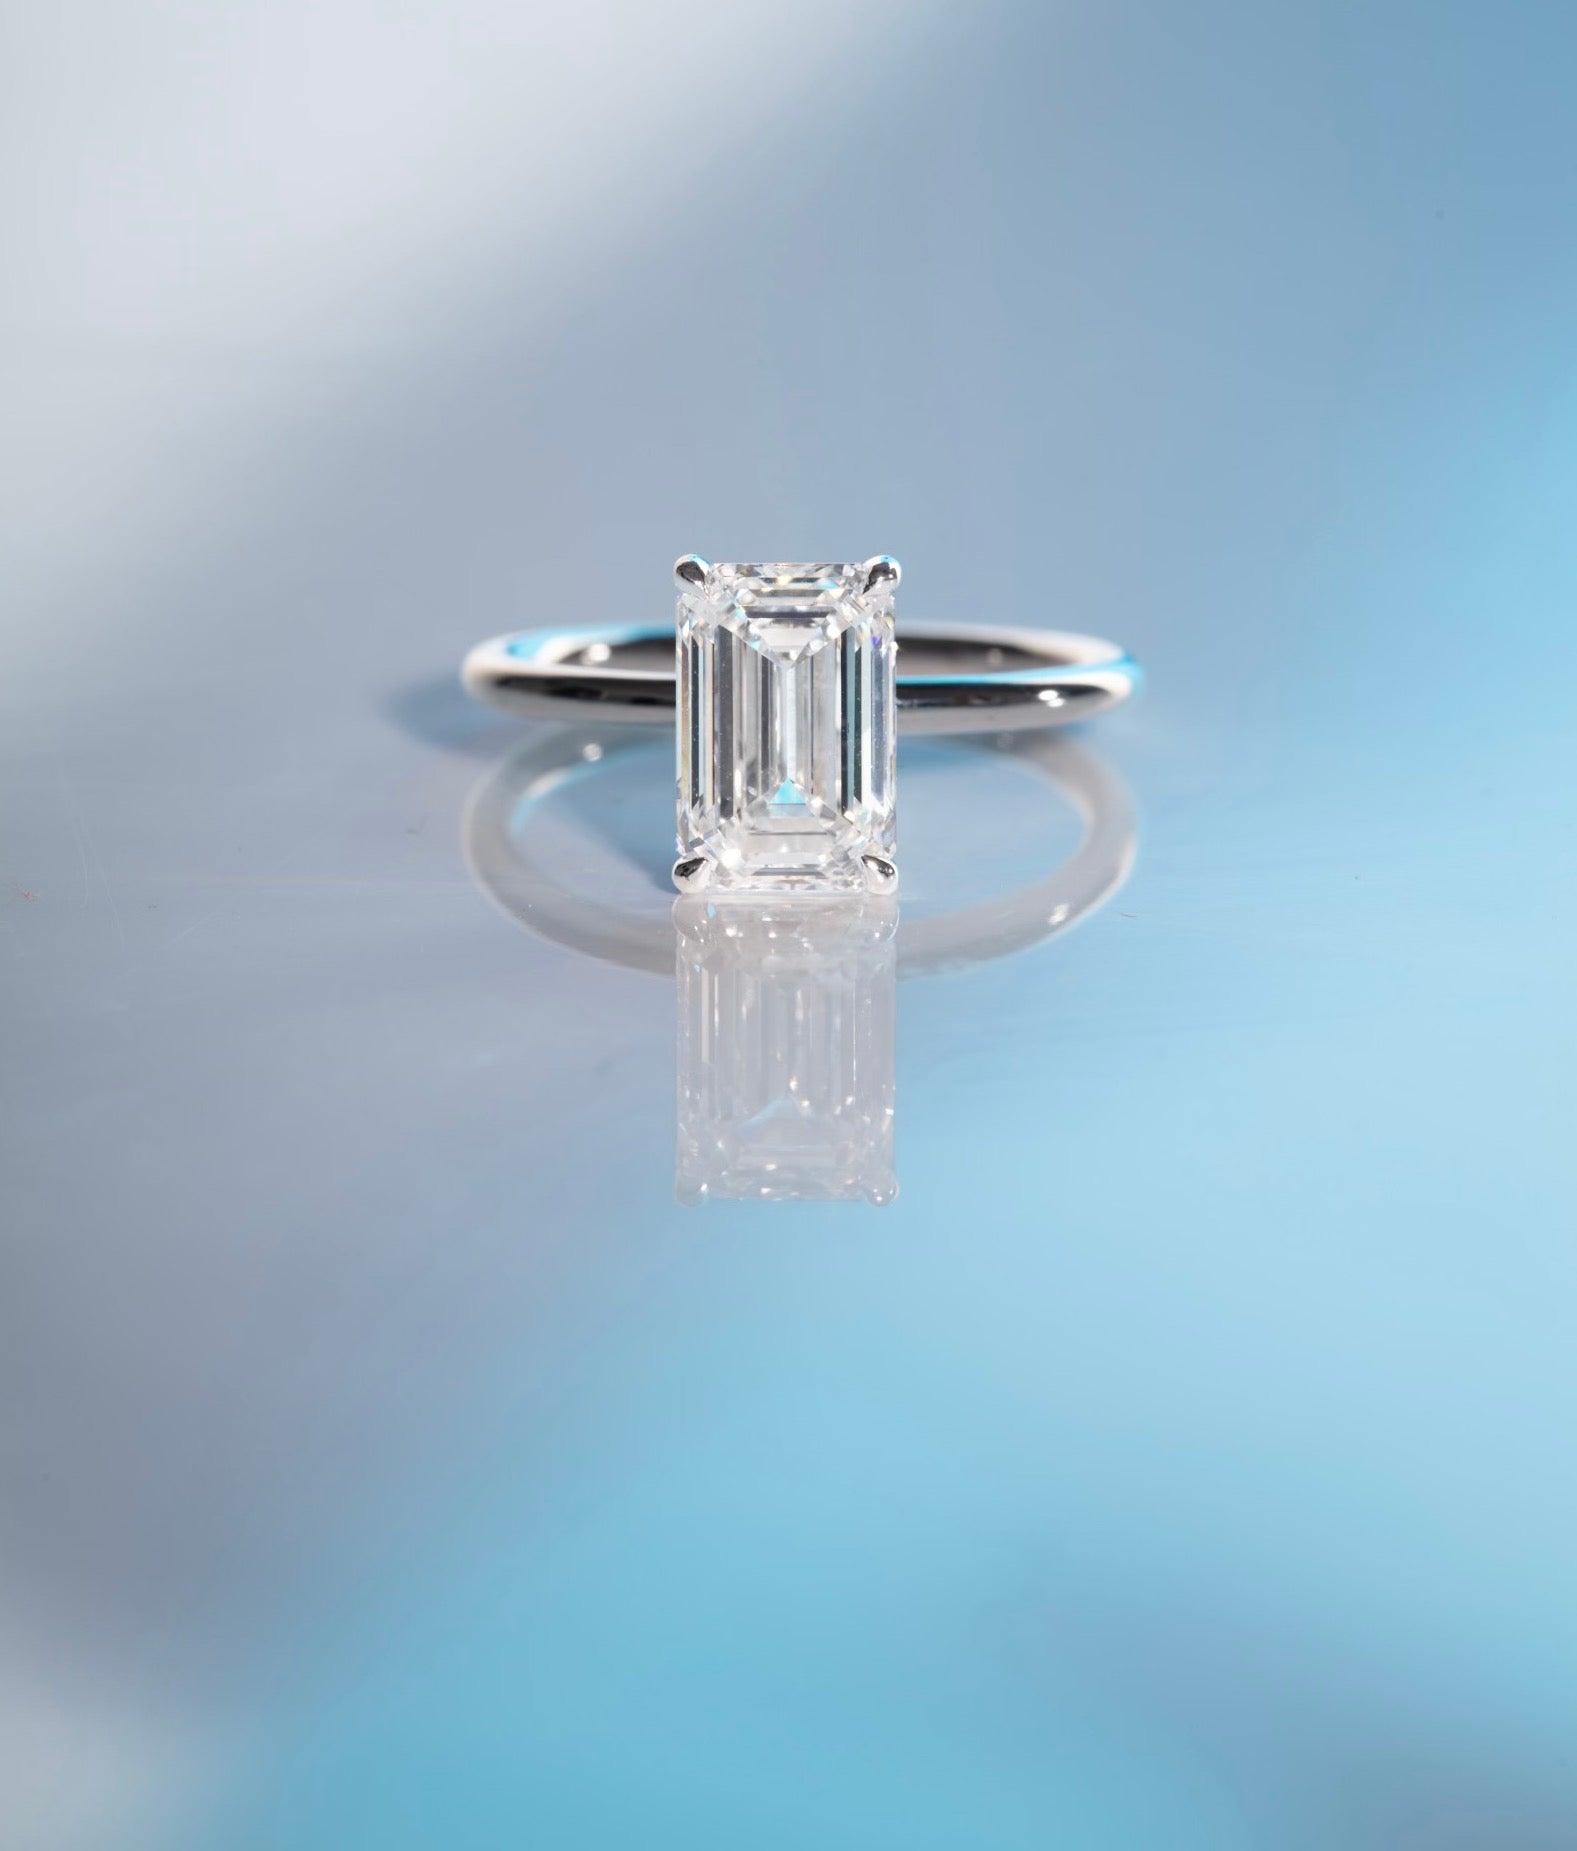 Or & Elle Engagement Suite. A custom 2.8 carat emerald diamond engagement ring with a thin 18K White Gold and Palladium band. OR & ELLE SPECIALIZES IN CUSTOM ENGAGEMENT JEWELRY TO CELEBRATE LIFE'S MOST INTIMATE MOMENTS. EACH ONE-OF-A-KIND DIAMOND IS SOURCED SPECIFICALLY FOR OUR CLIENTS.